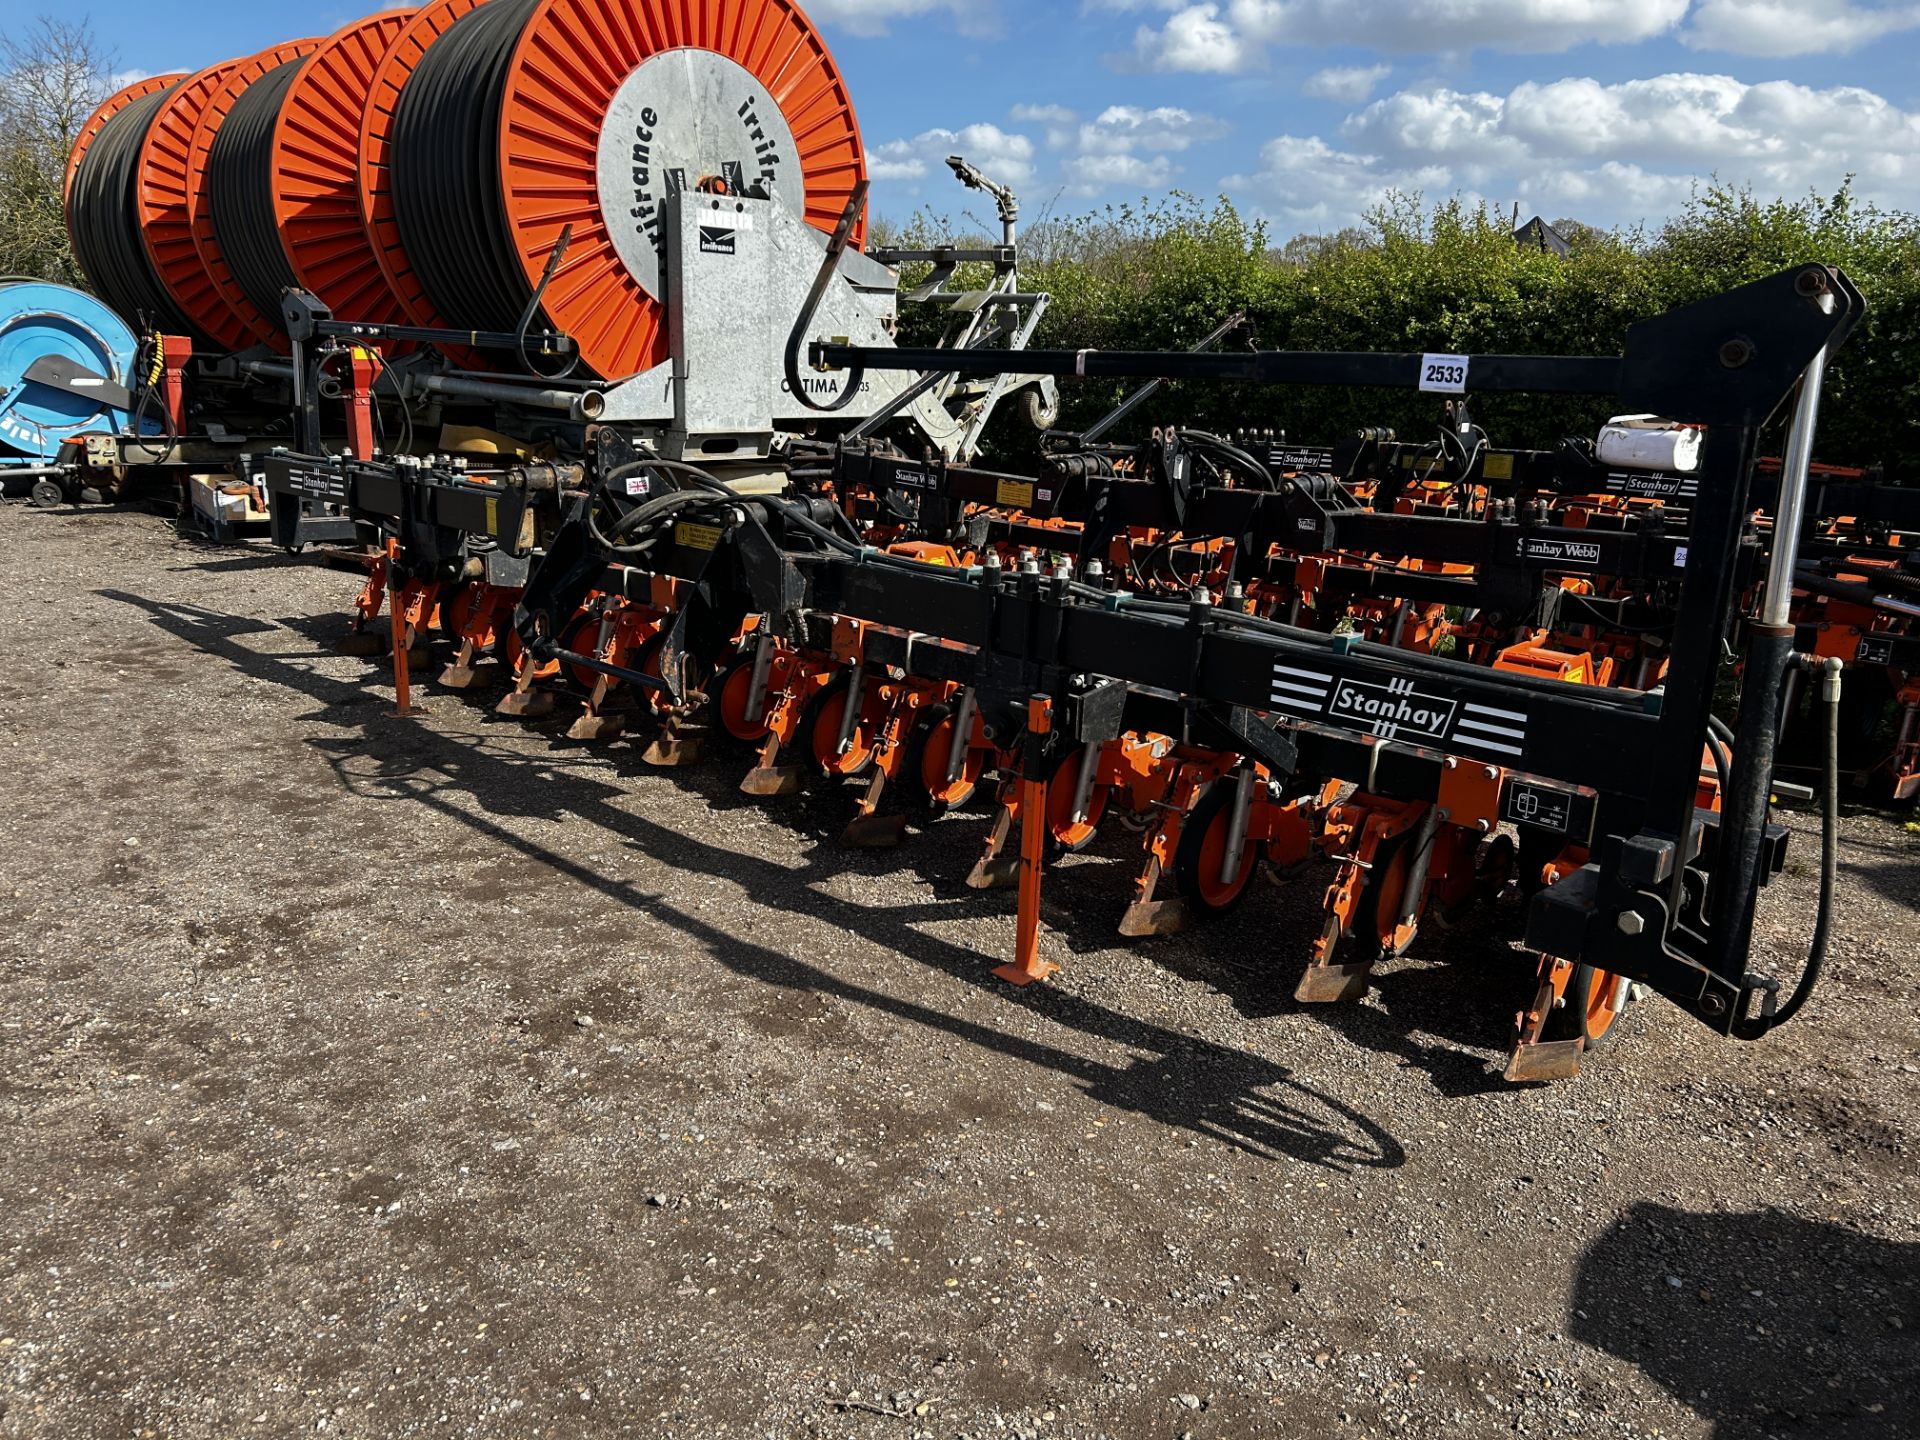 Stanhay Rallye 592 hdraulic folding 12 row beet drill. With bout markers. V - Bild 2 aus 28